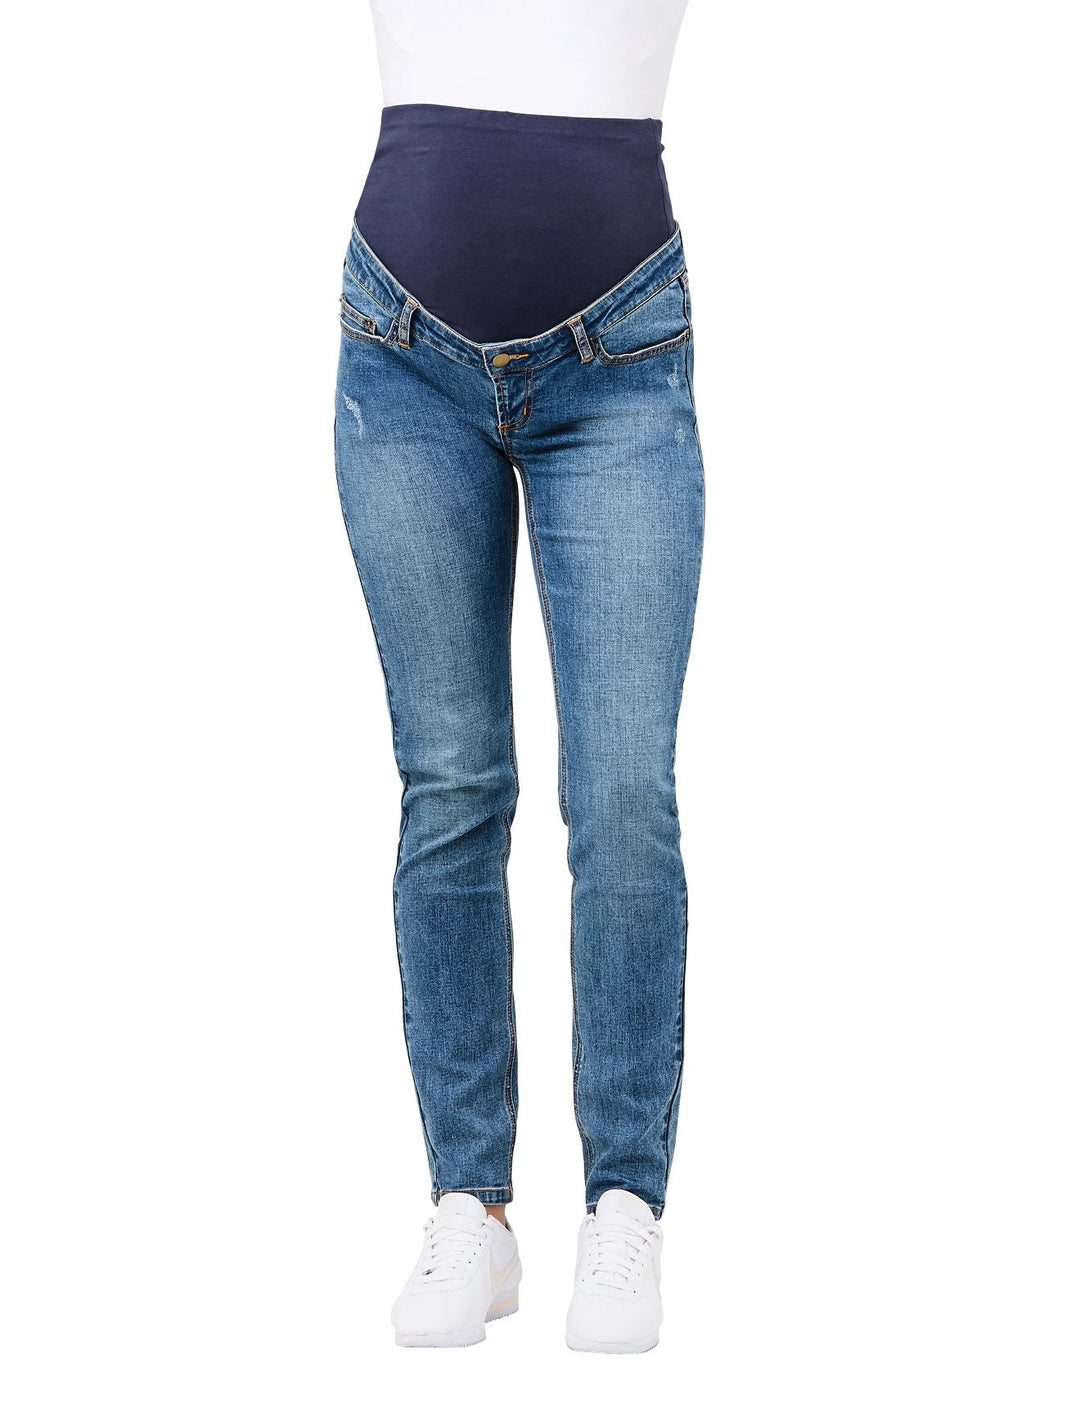 Tyler | Slim Leg Maternity Jean - Nest and Sprout Maternity